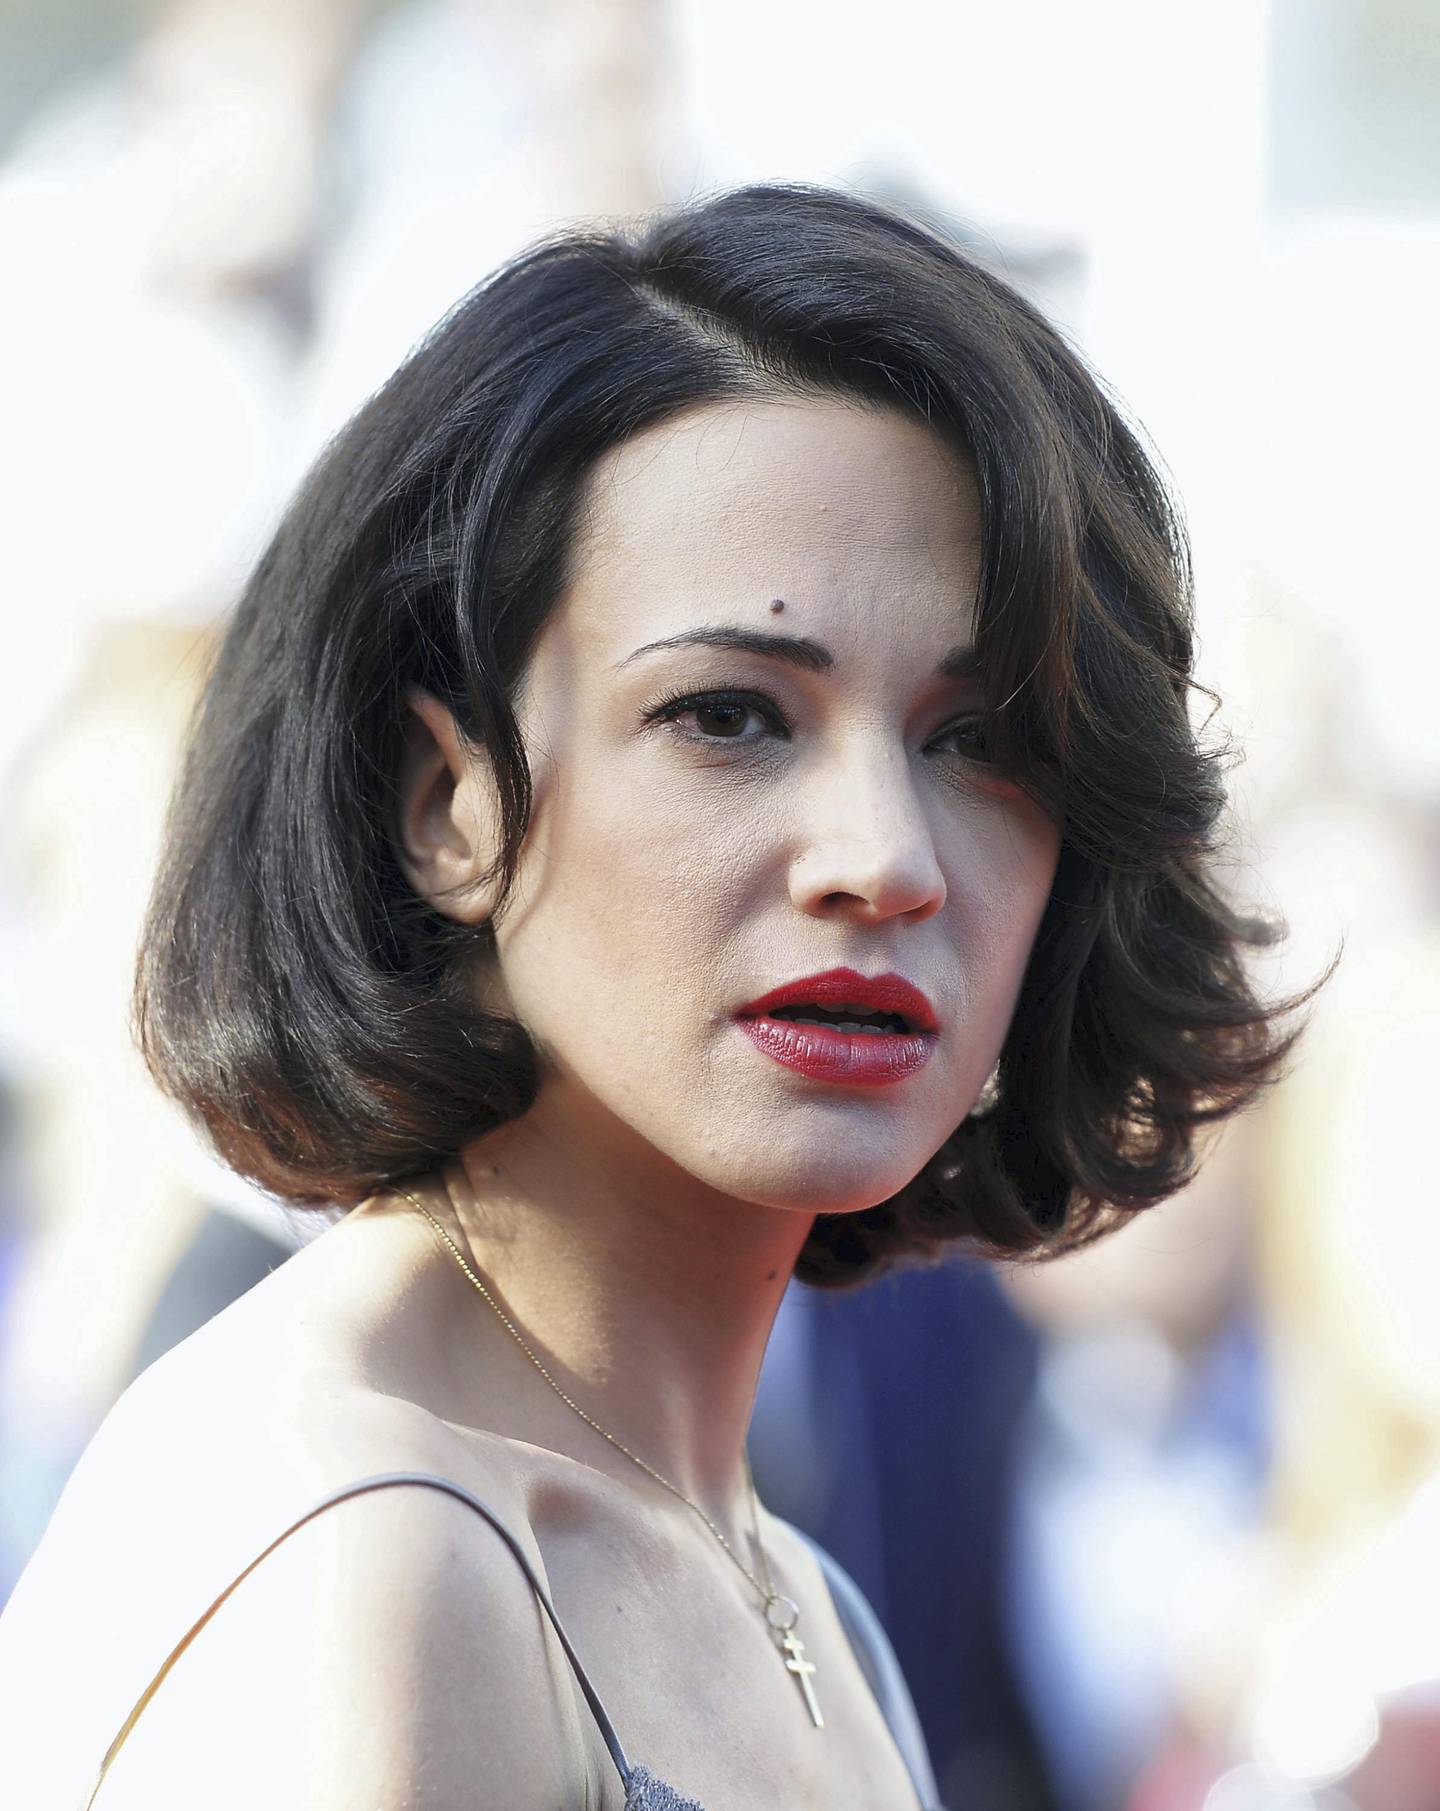 CANNES, FRANCE - MAY 26:  Asia Argento attends the Premiere of 'Zulu' and the Closing Ceremony of The 66th Annual Cannes Film Festival at Palais des Festivals on May 26, 2013 in Cannes, France.  (Photo by Dominique Charriau/WireImage)